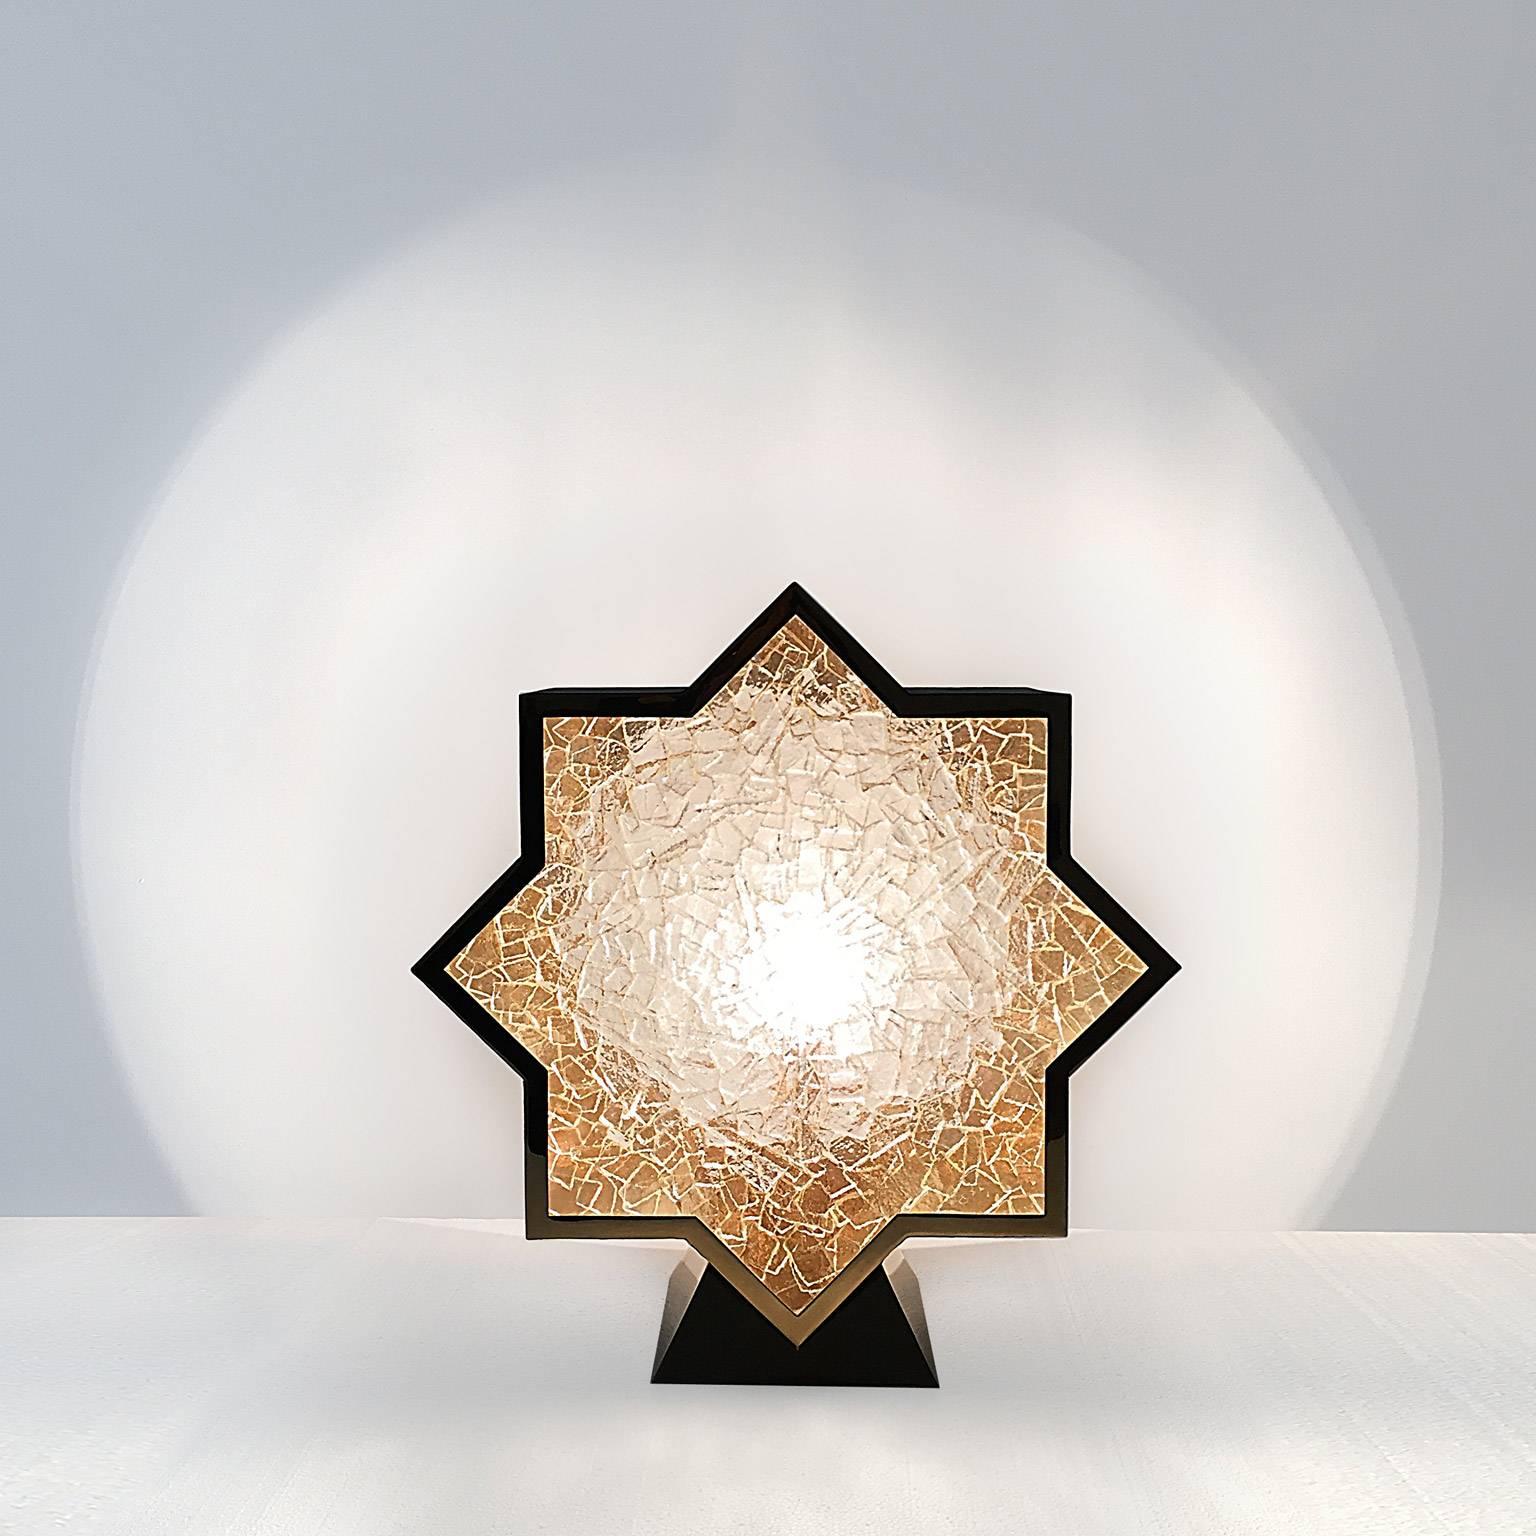 Star table lamp in gold gilt brass, fused glass screen and blue suede.
An adjustable moon pattern is projected on the wall behind the lamp when the switch is on.

Prototype N°1/2 available
The pieces are signed and numbered.

About PiSigma:
Symbolic